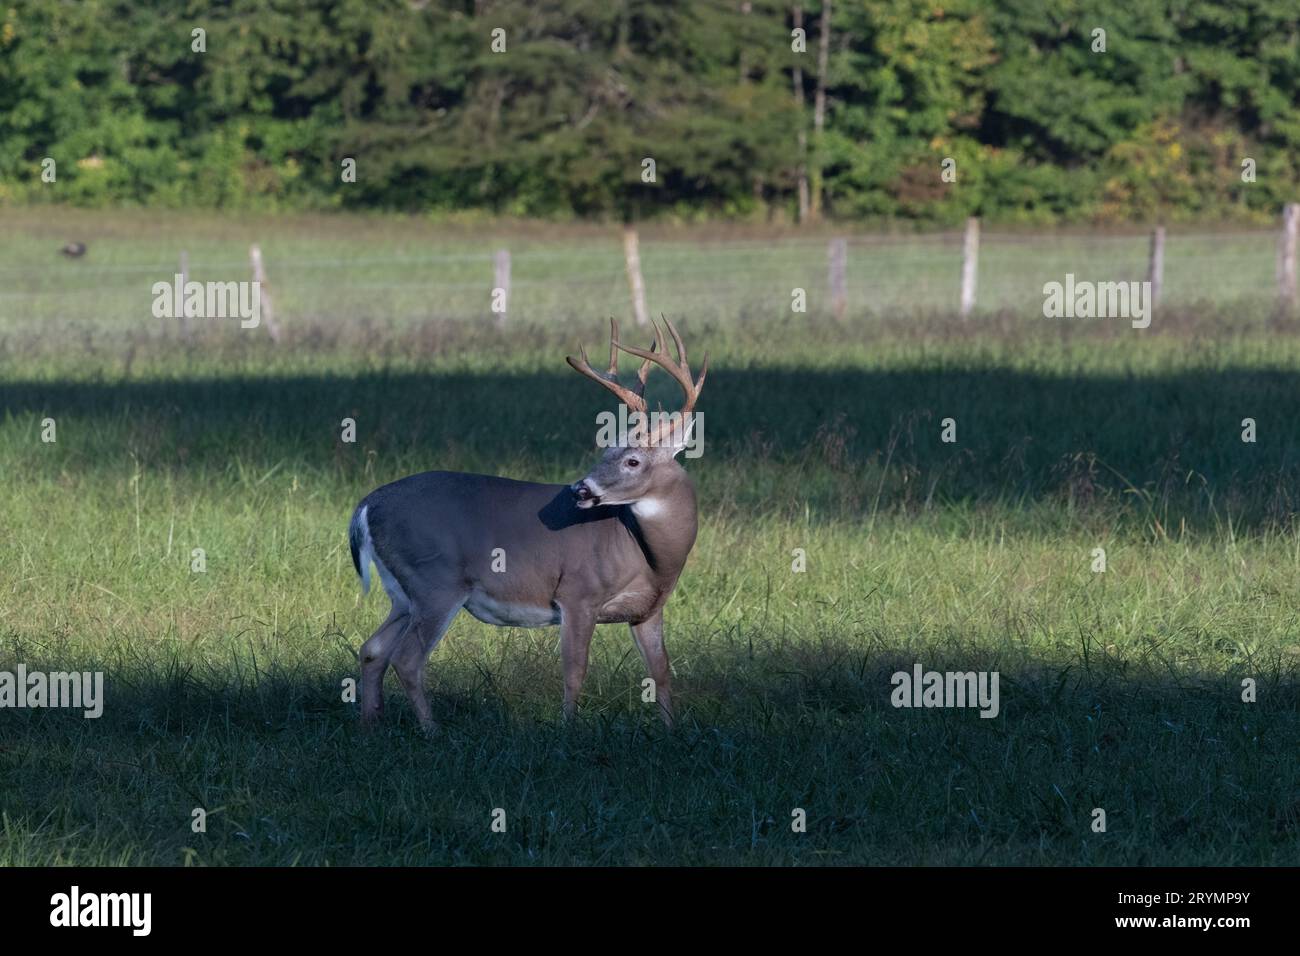 Large 8-point buck white tail deer in a field his head turned displaying his large antler rack. Stock Photo